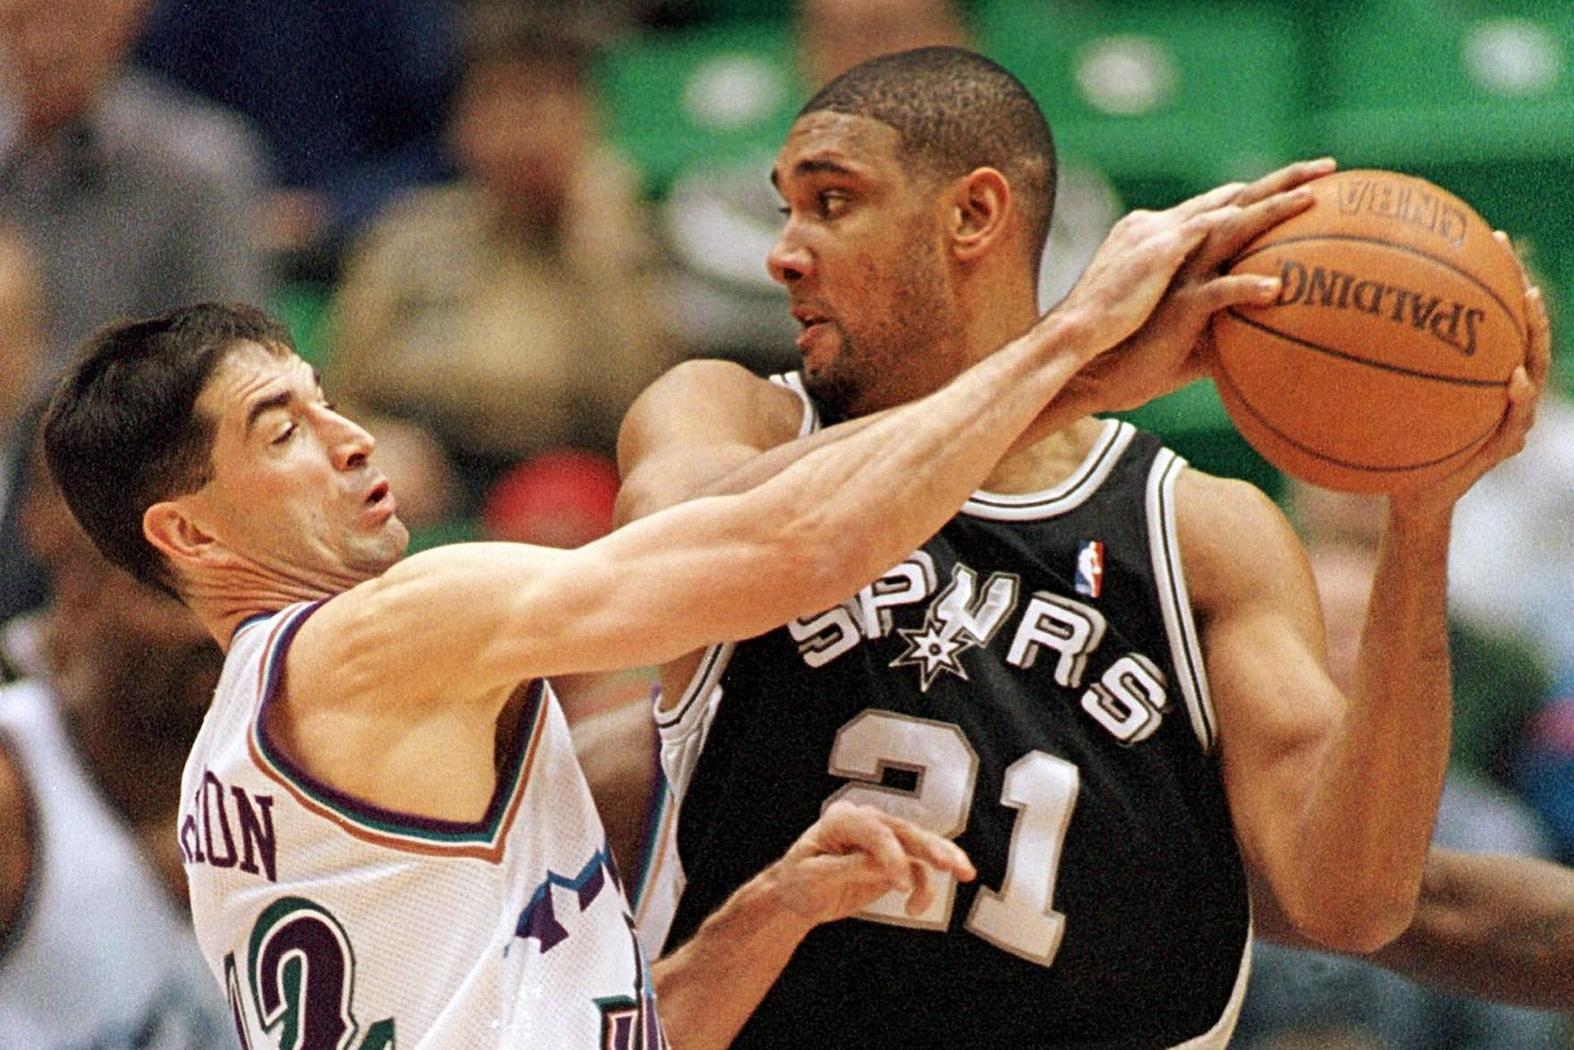 Tony Parker: Wembanyama Has Potential to Have Career Like Spurs Legend Tim  Duncan, News, Scores, Highlights, Stats, and Rumors